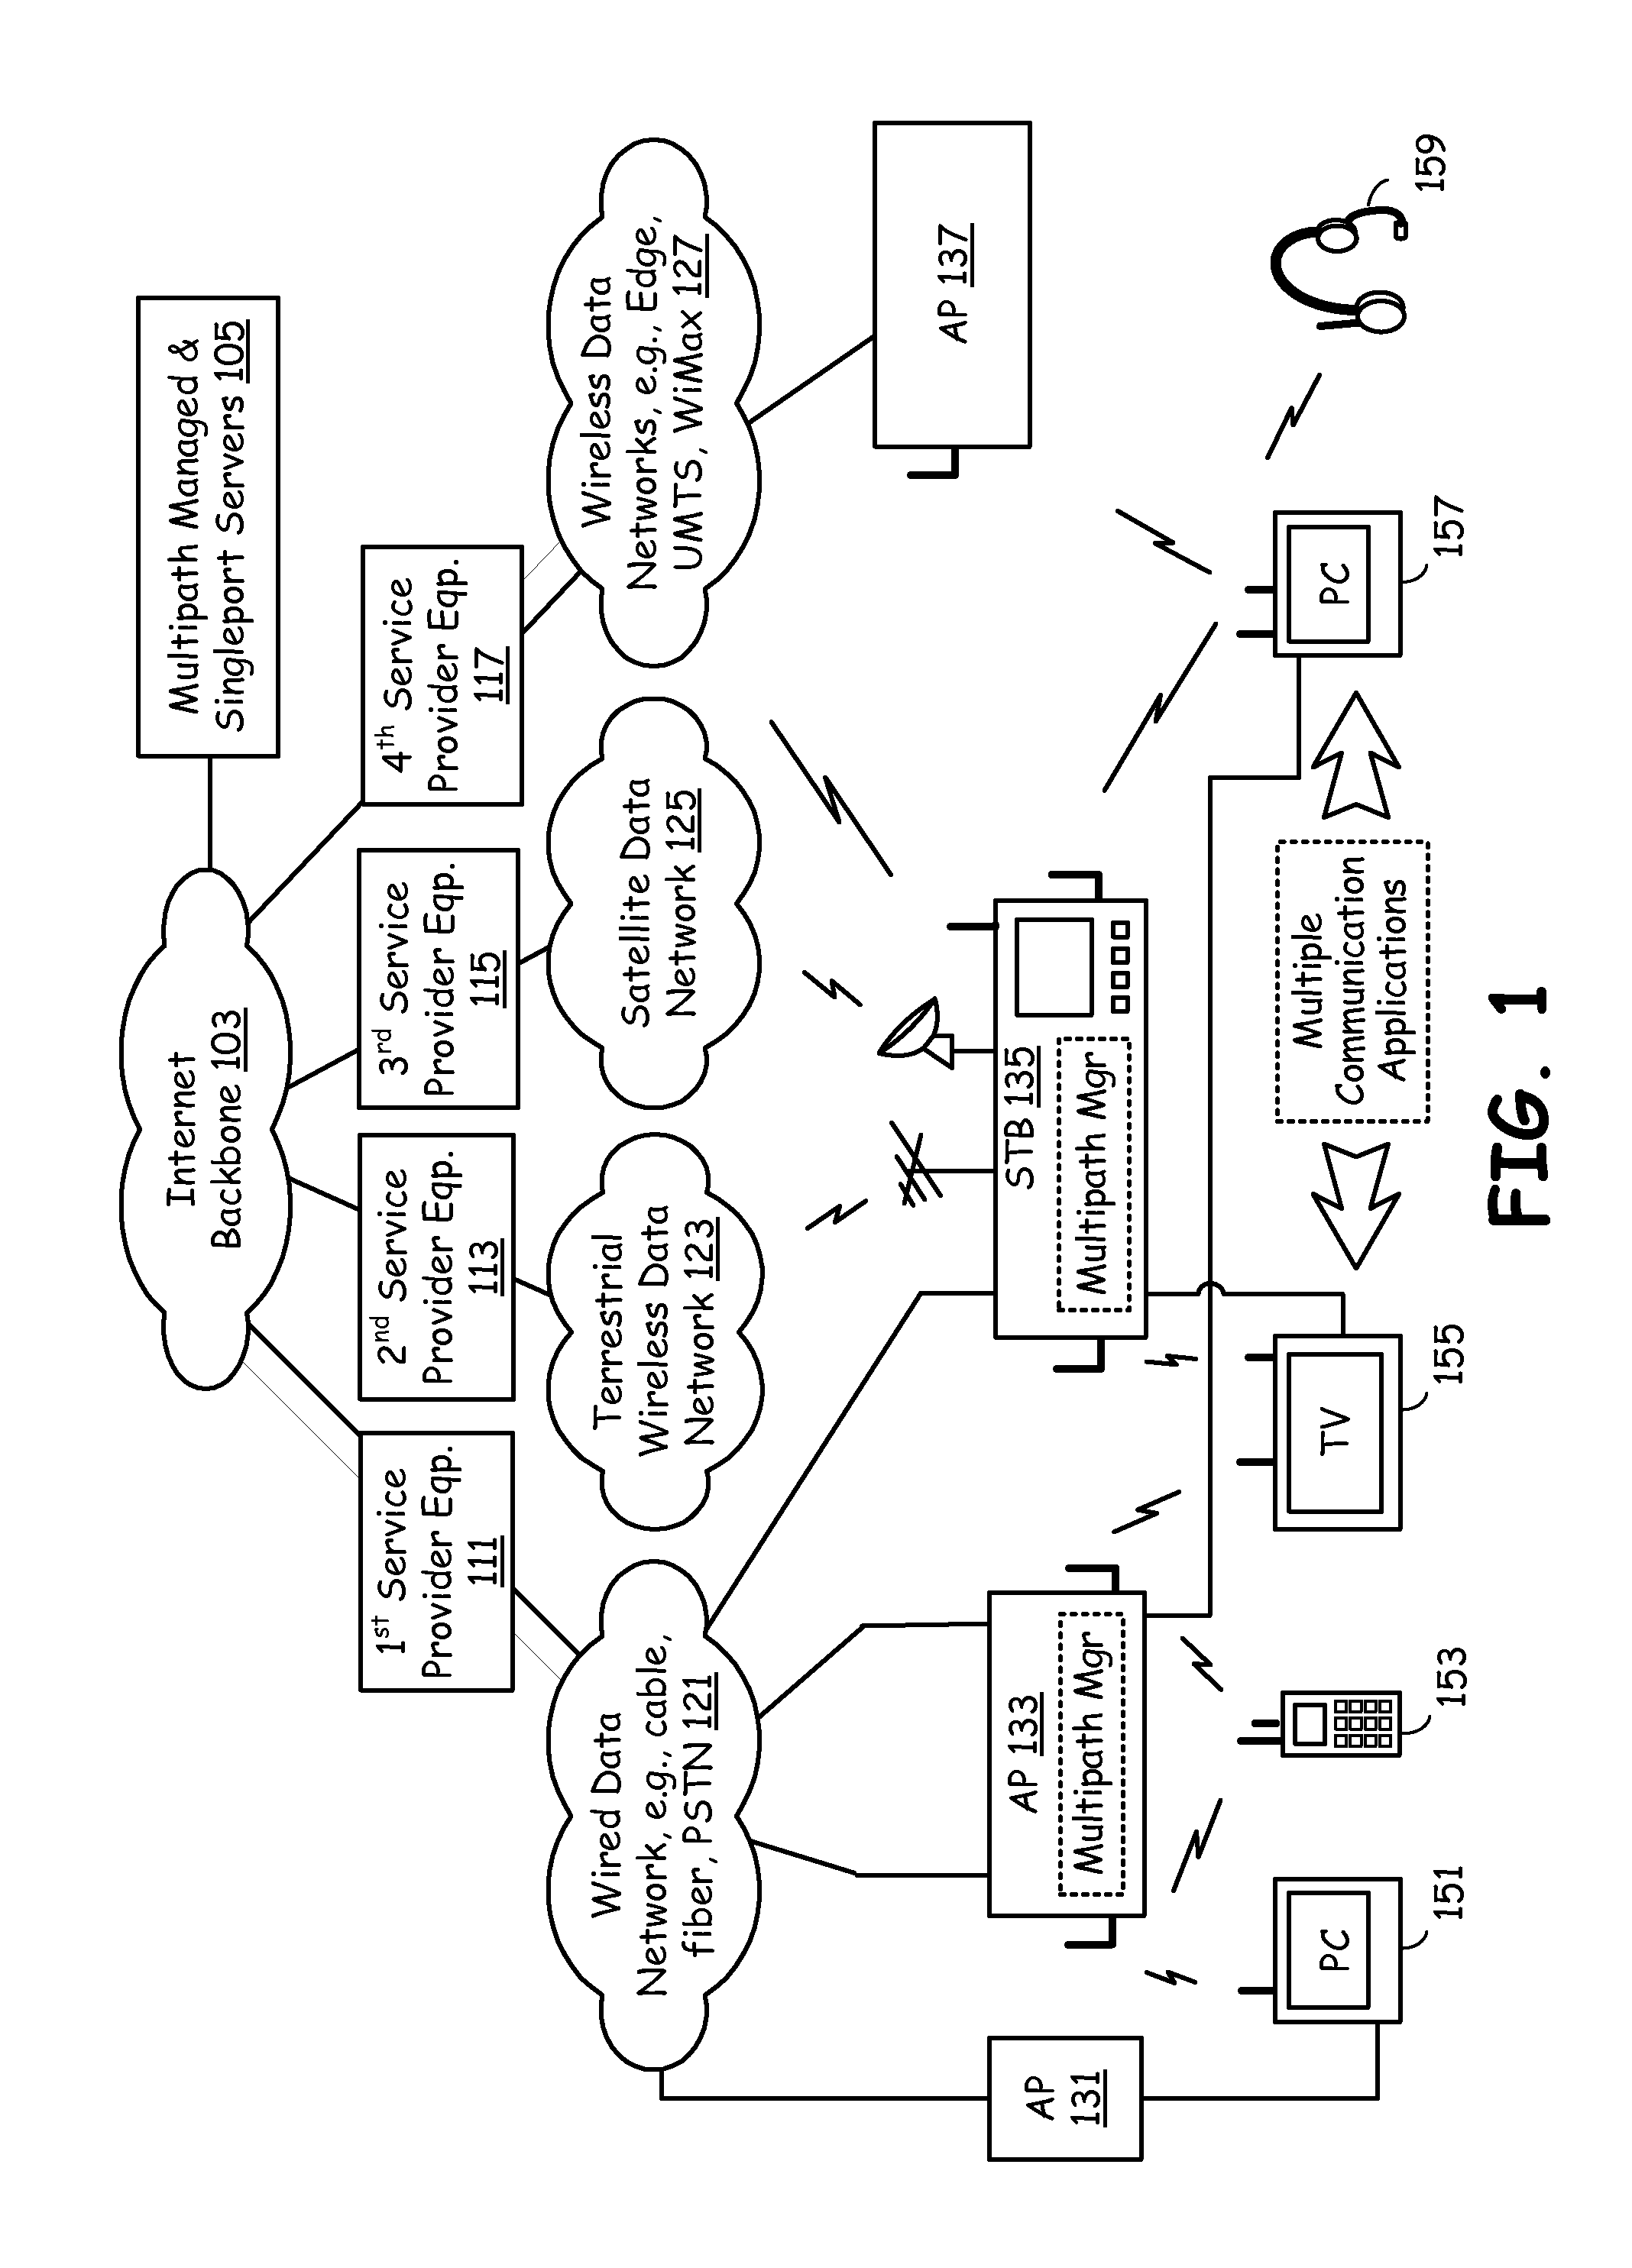 Network nodes cooperatively routing traffic flow amongst wired and wireless networks